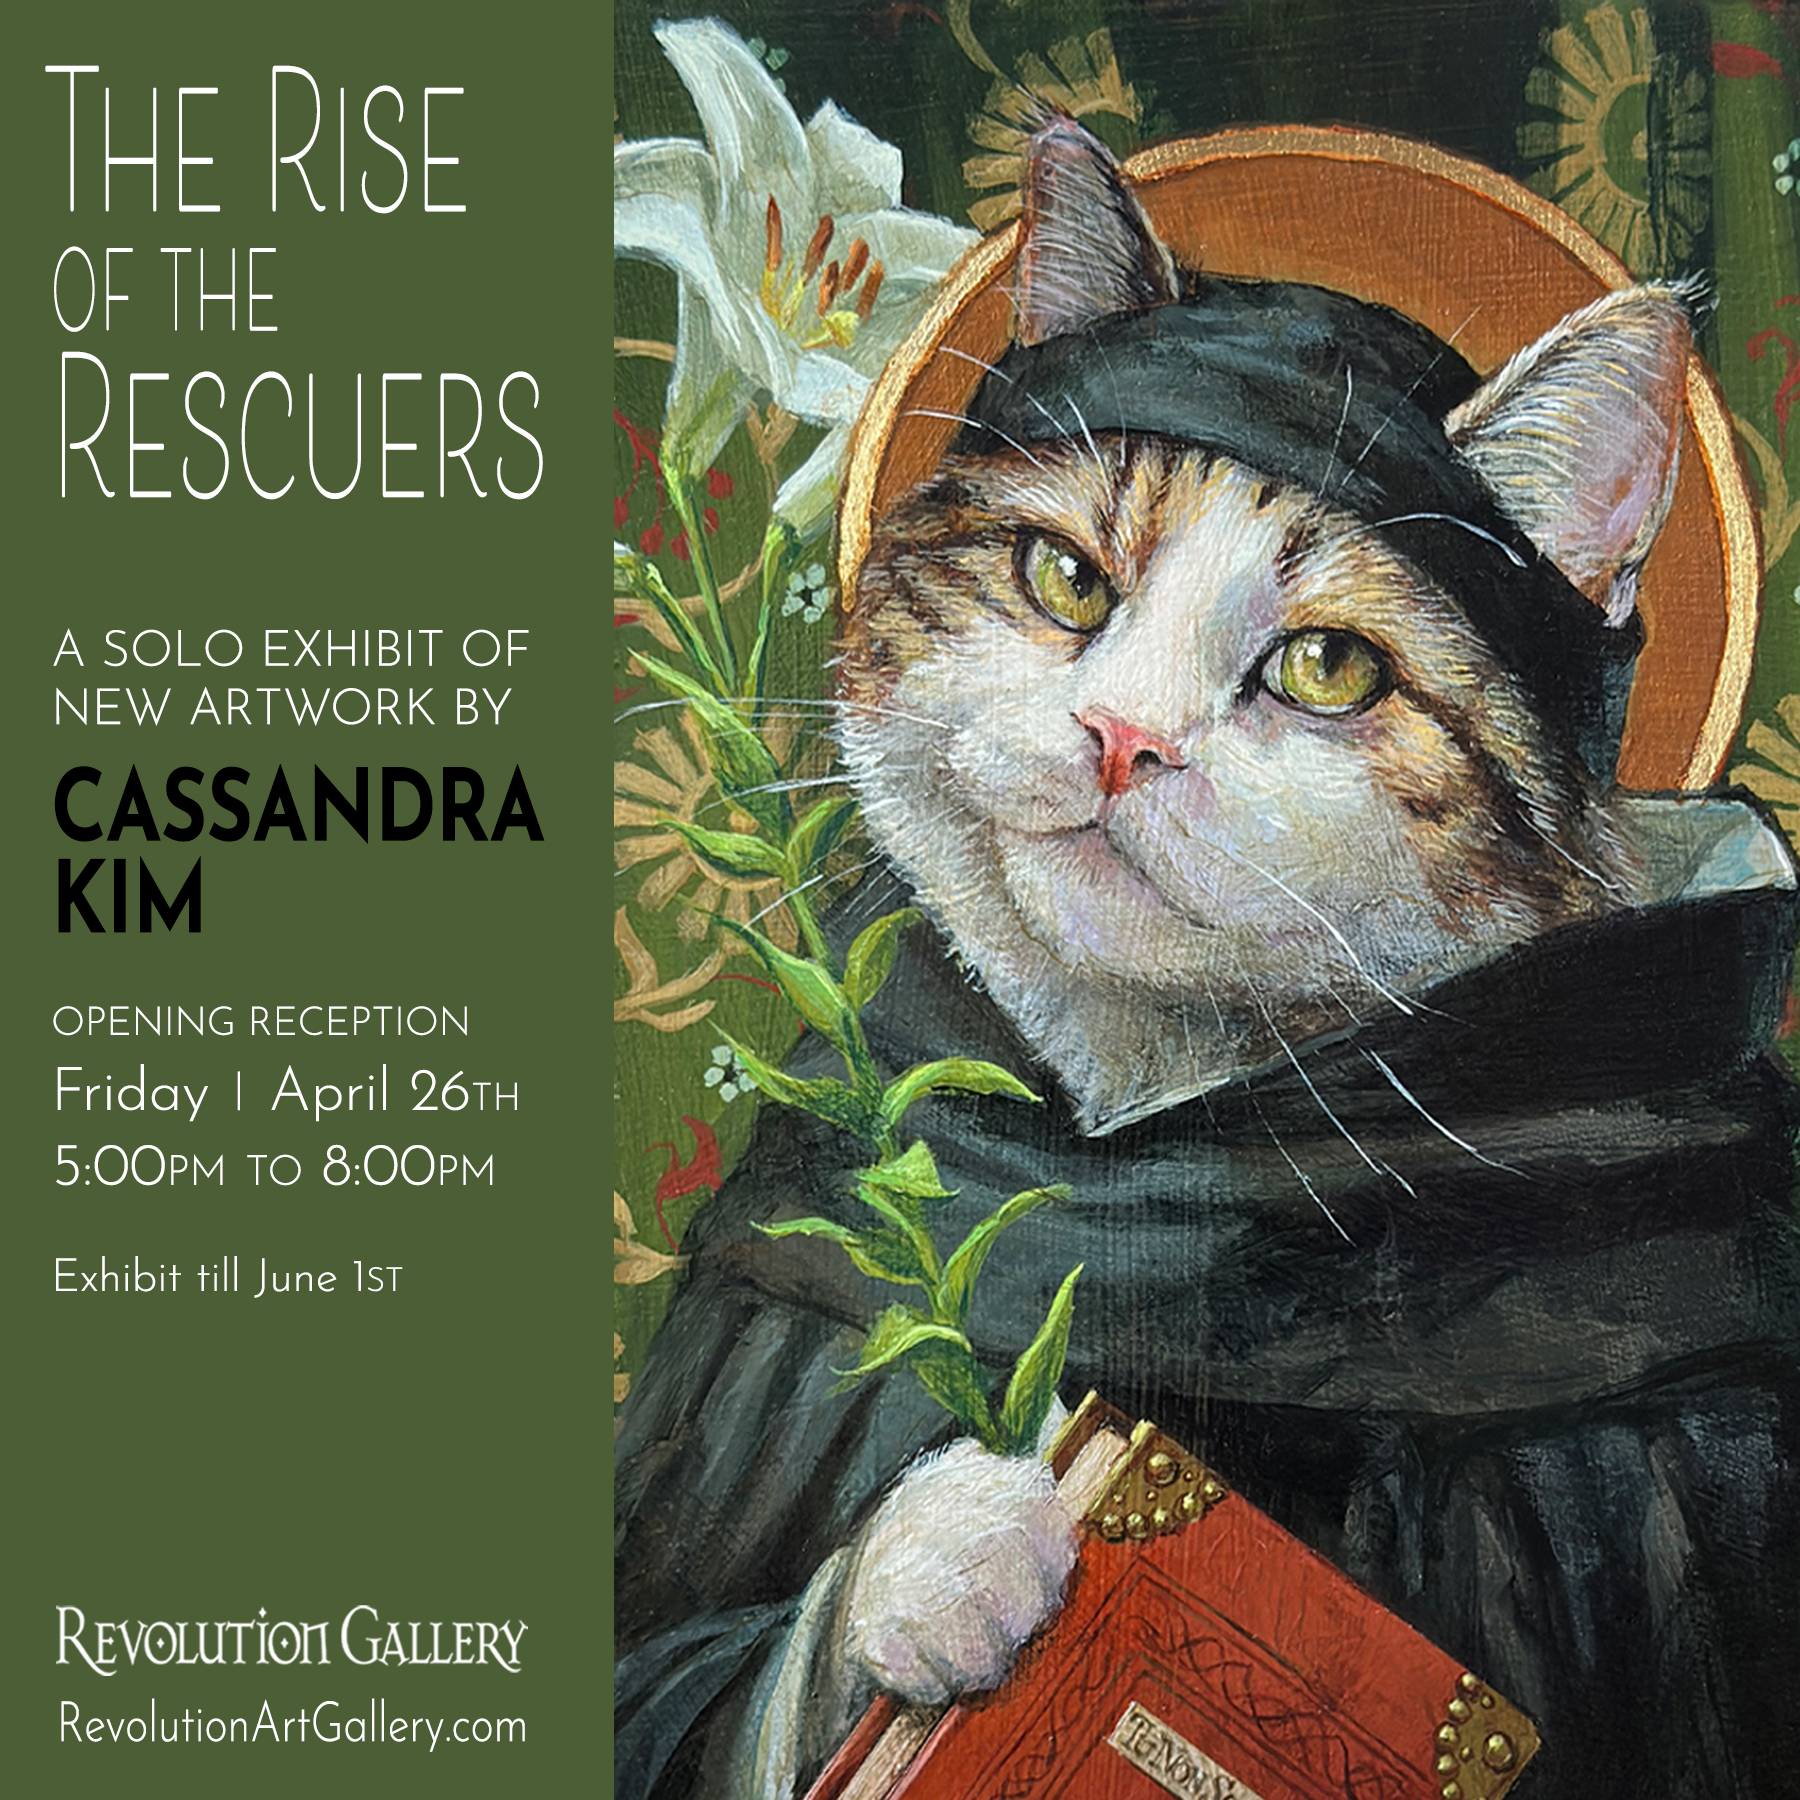 RG_THE_RISE_OF_THE_RESCUERS_IG